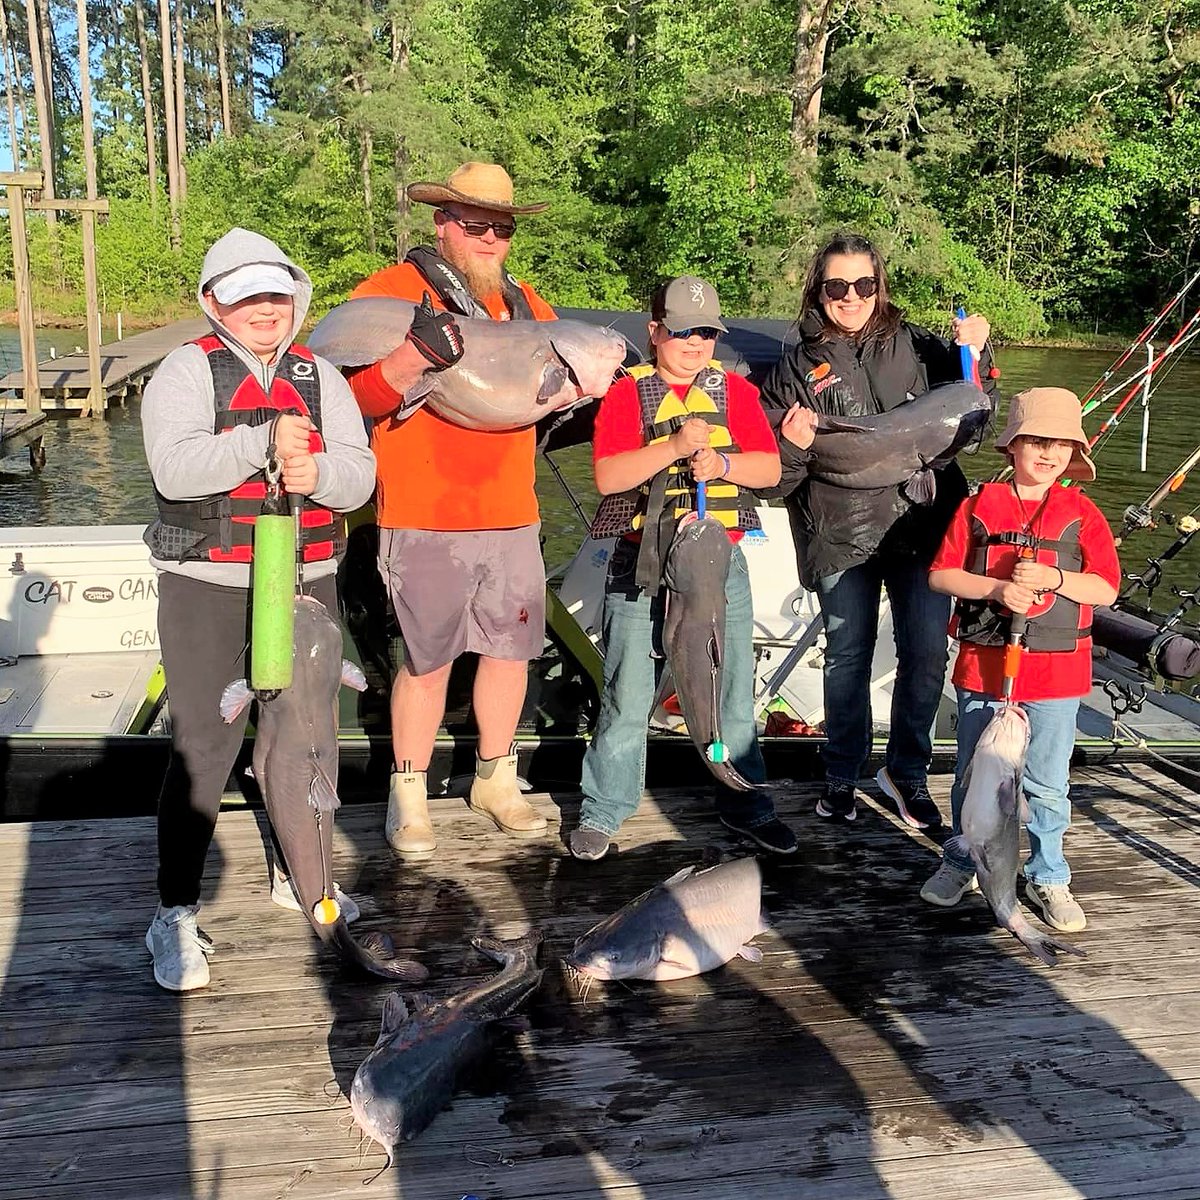 The action began with a massive catch as Khloie, only 13 years old, successfully caught a 47-pound catfish. 'As she began to reel it in, I remember her saying, 'This is hard!!!' I told her that's because it's a big fish!' God bless! #childswish #ussa #fishing